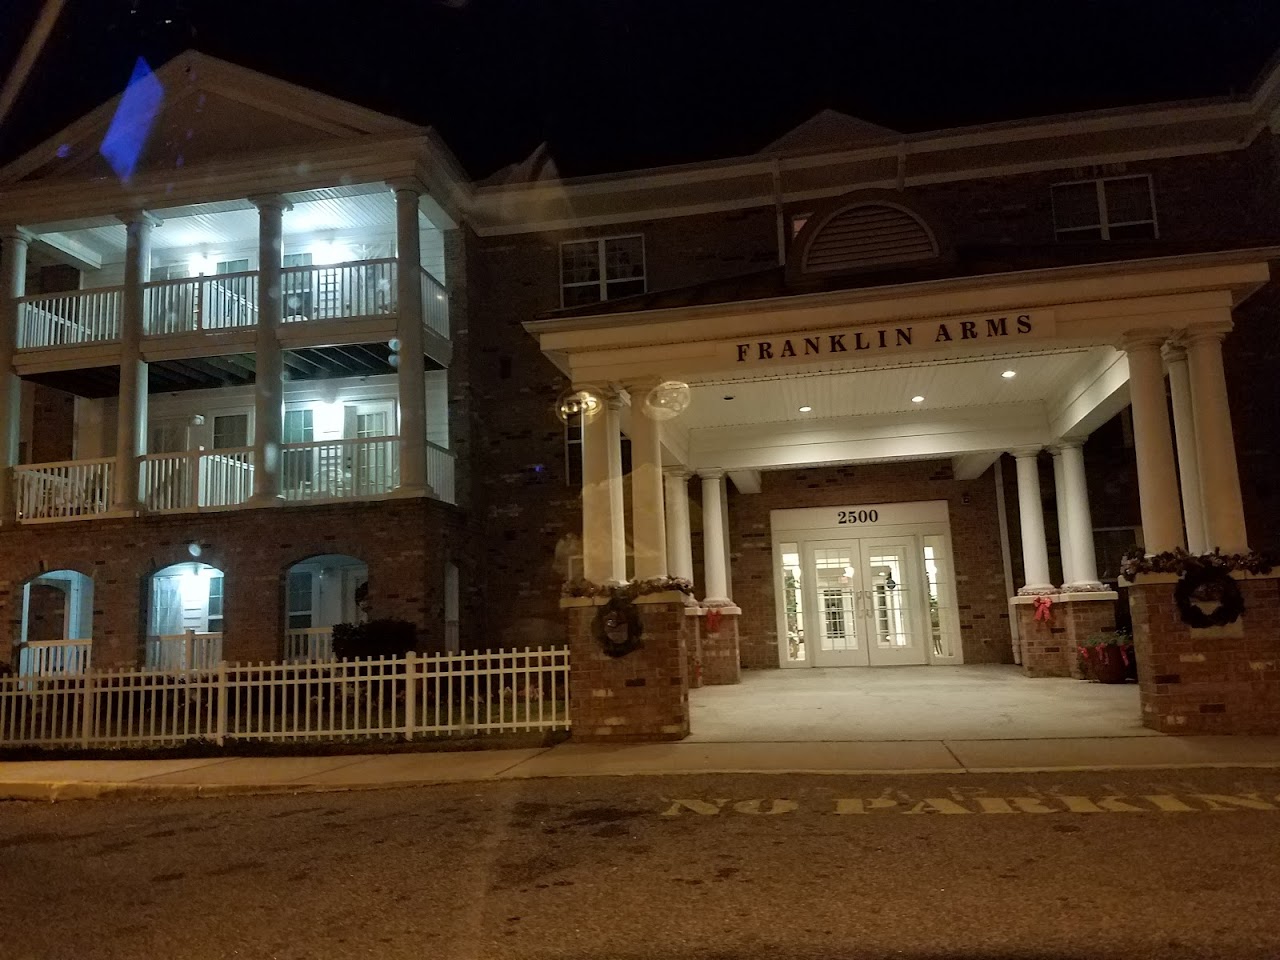 Photo of FRANKLIN ARMS. Affordable housing located at 2500 E PRINCESS ANNE RD NORFOLK, VA 23504